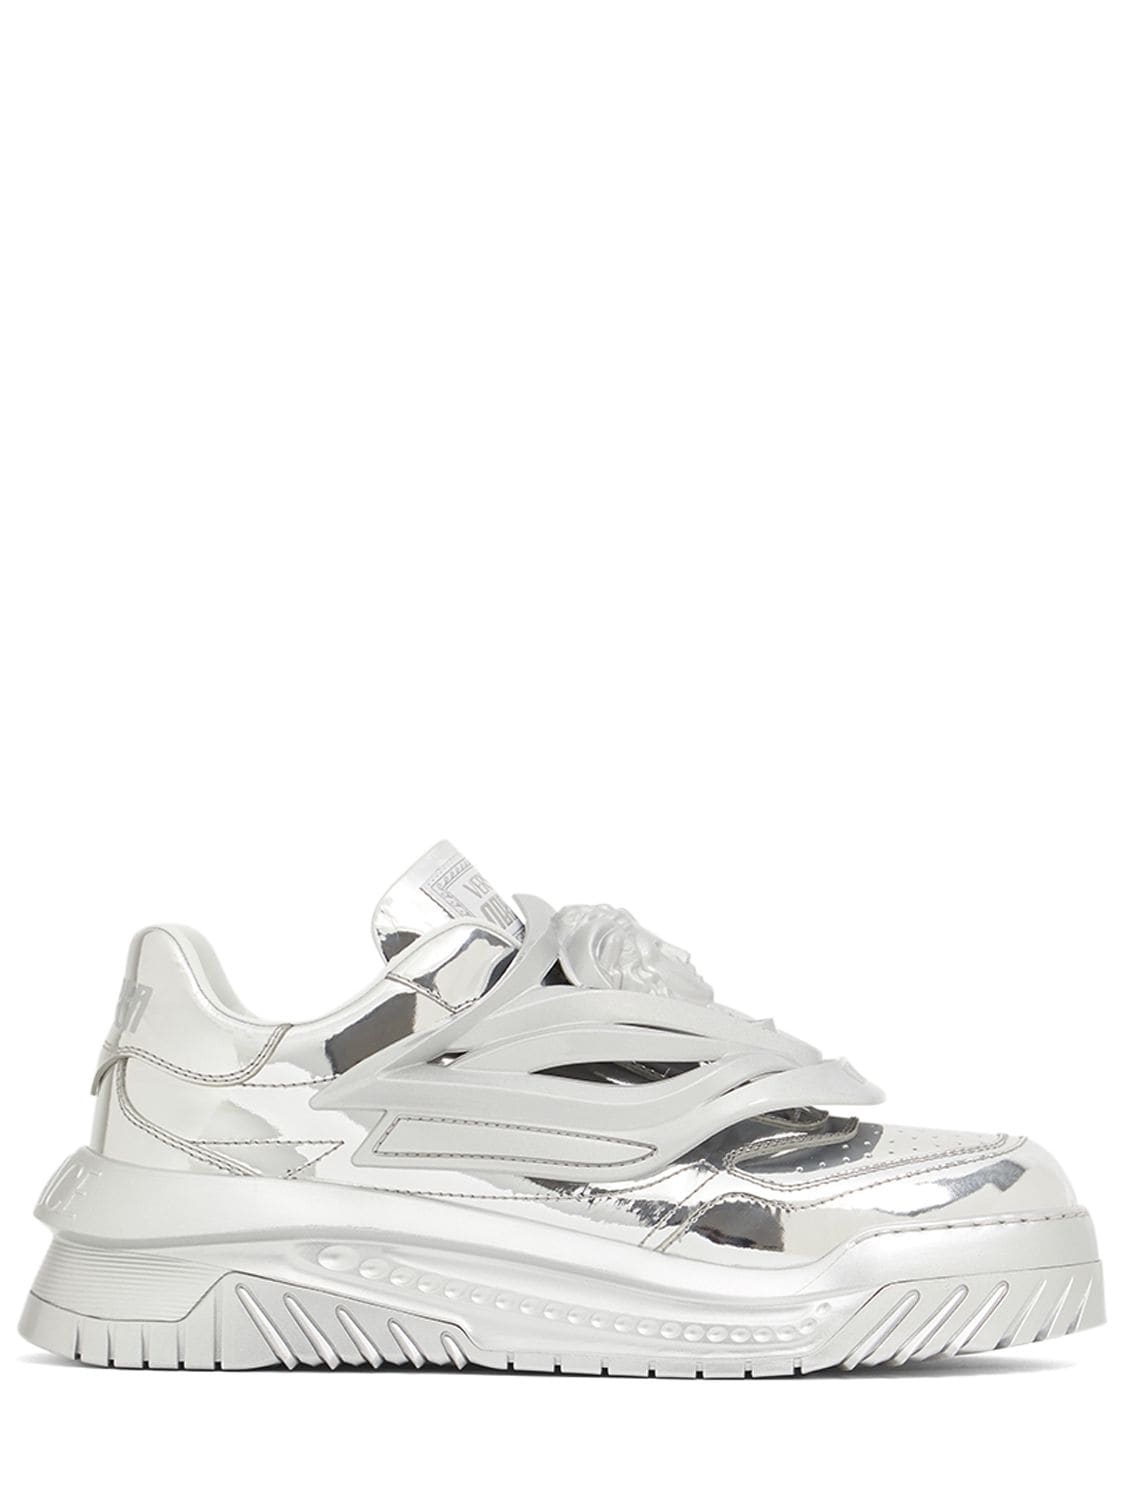 VERSACE ODISSEA LAMINATE LEATHER SNEAKERS